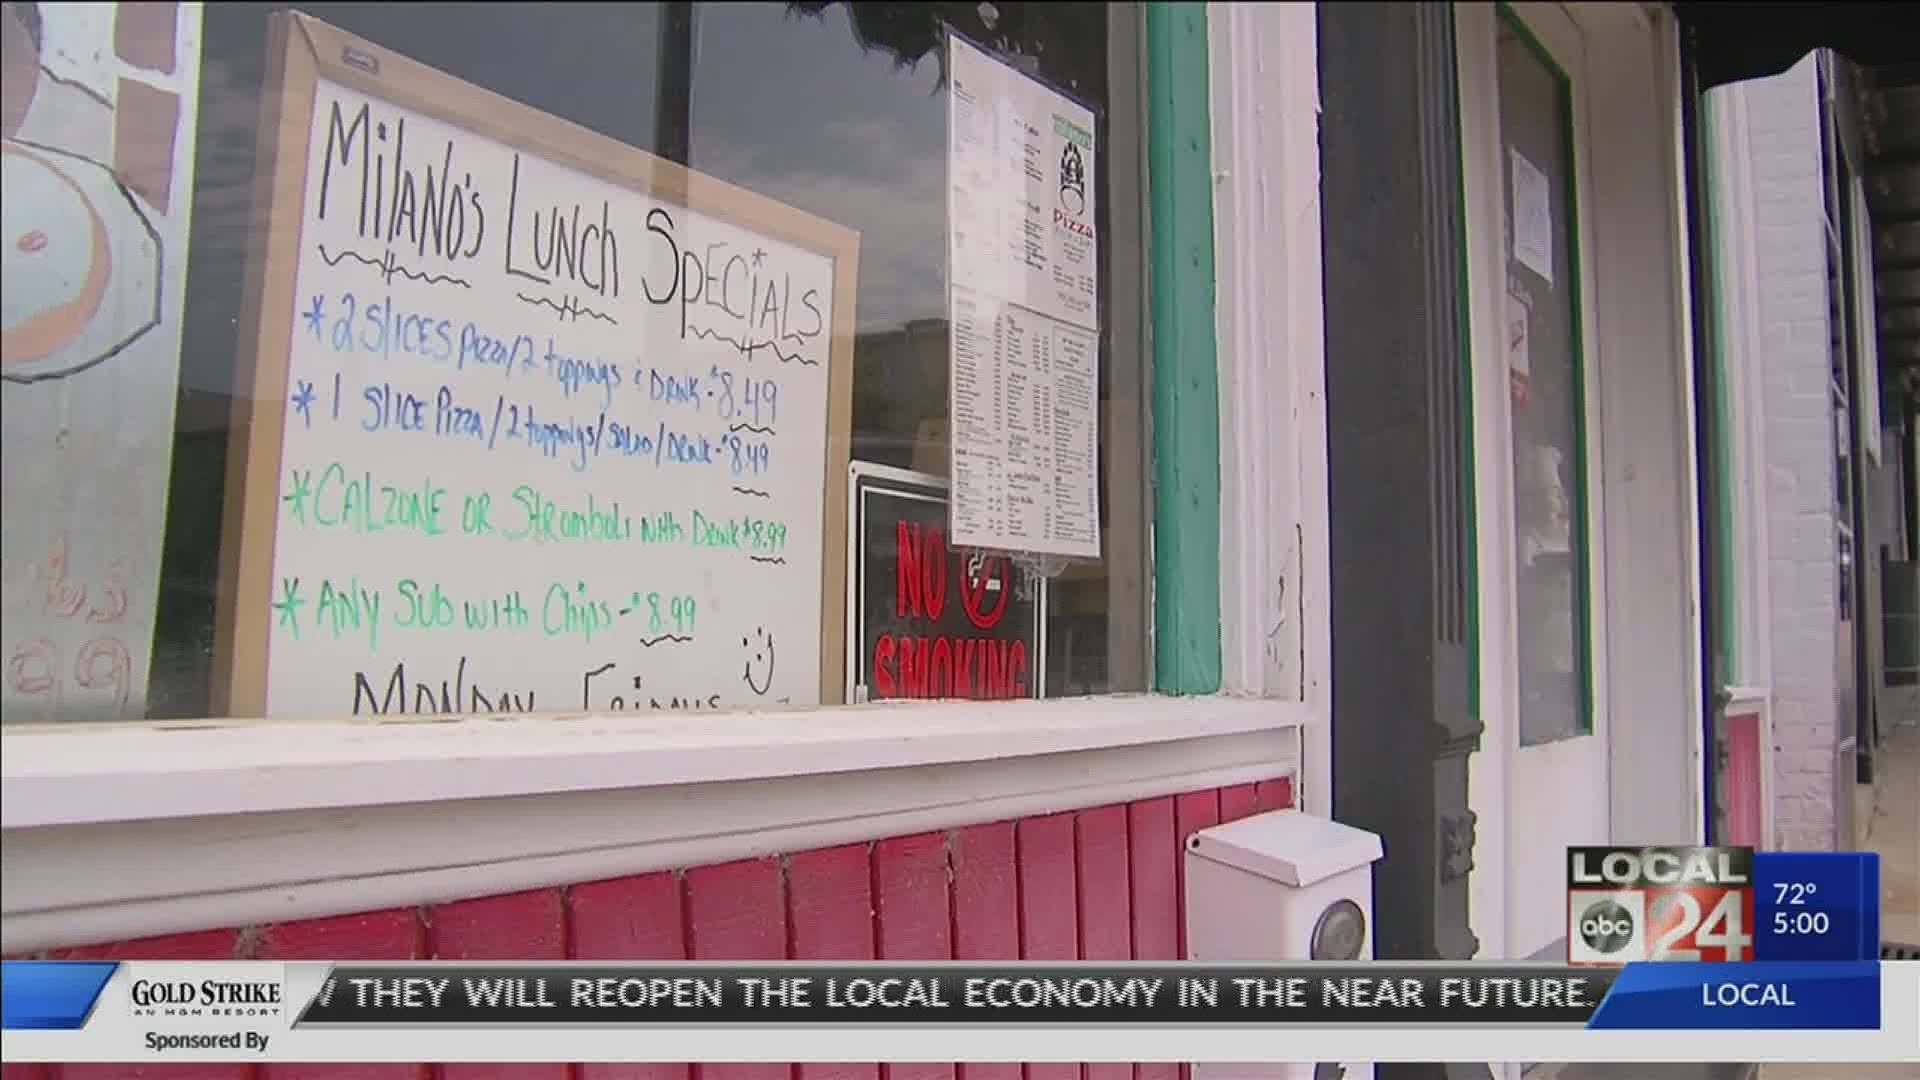 Some restaurants owners tell Local 24 News they are sticking with take out, saying it is too soon to reopen fully.